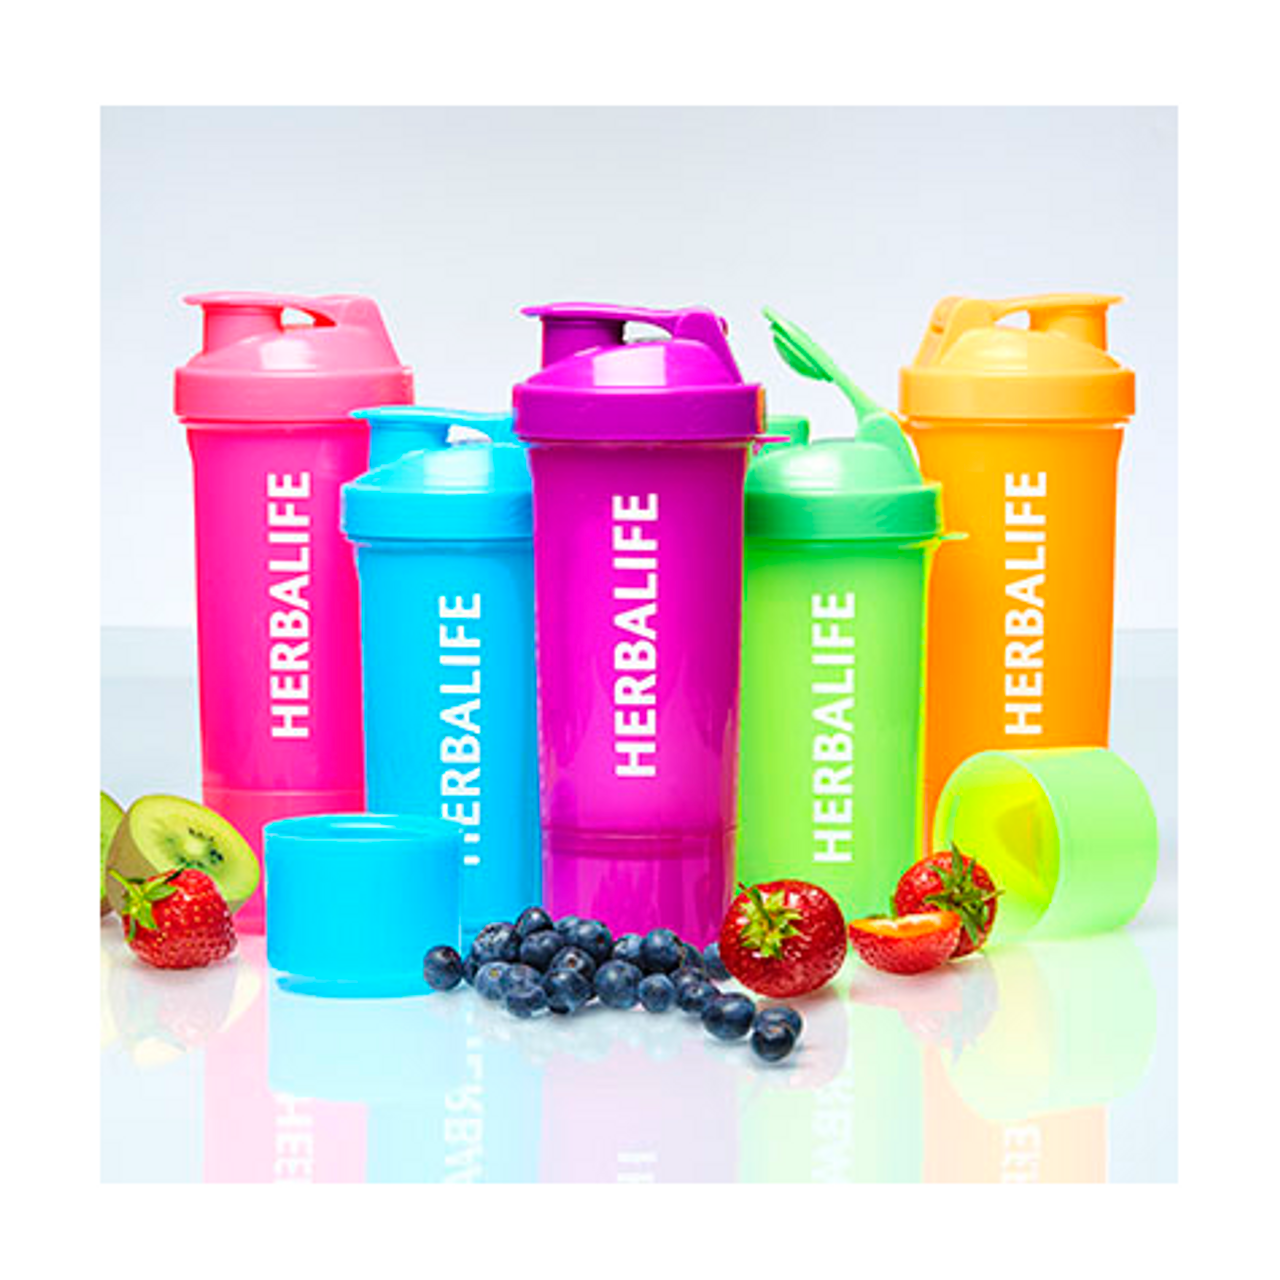 https://cdn11.bigcommerce.com/s-yyr3tzu8q0/images/stencil/1280x1280/products/133/475/Herbalife_Neon_Shakers__30122.1550162569.png?c=2?imbypass=on